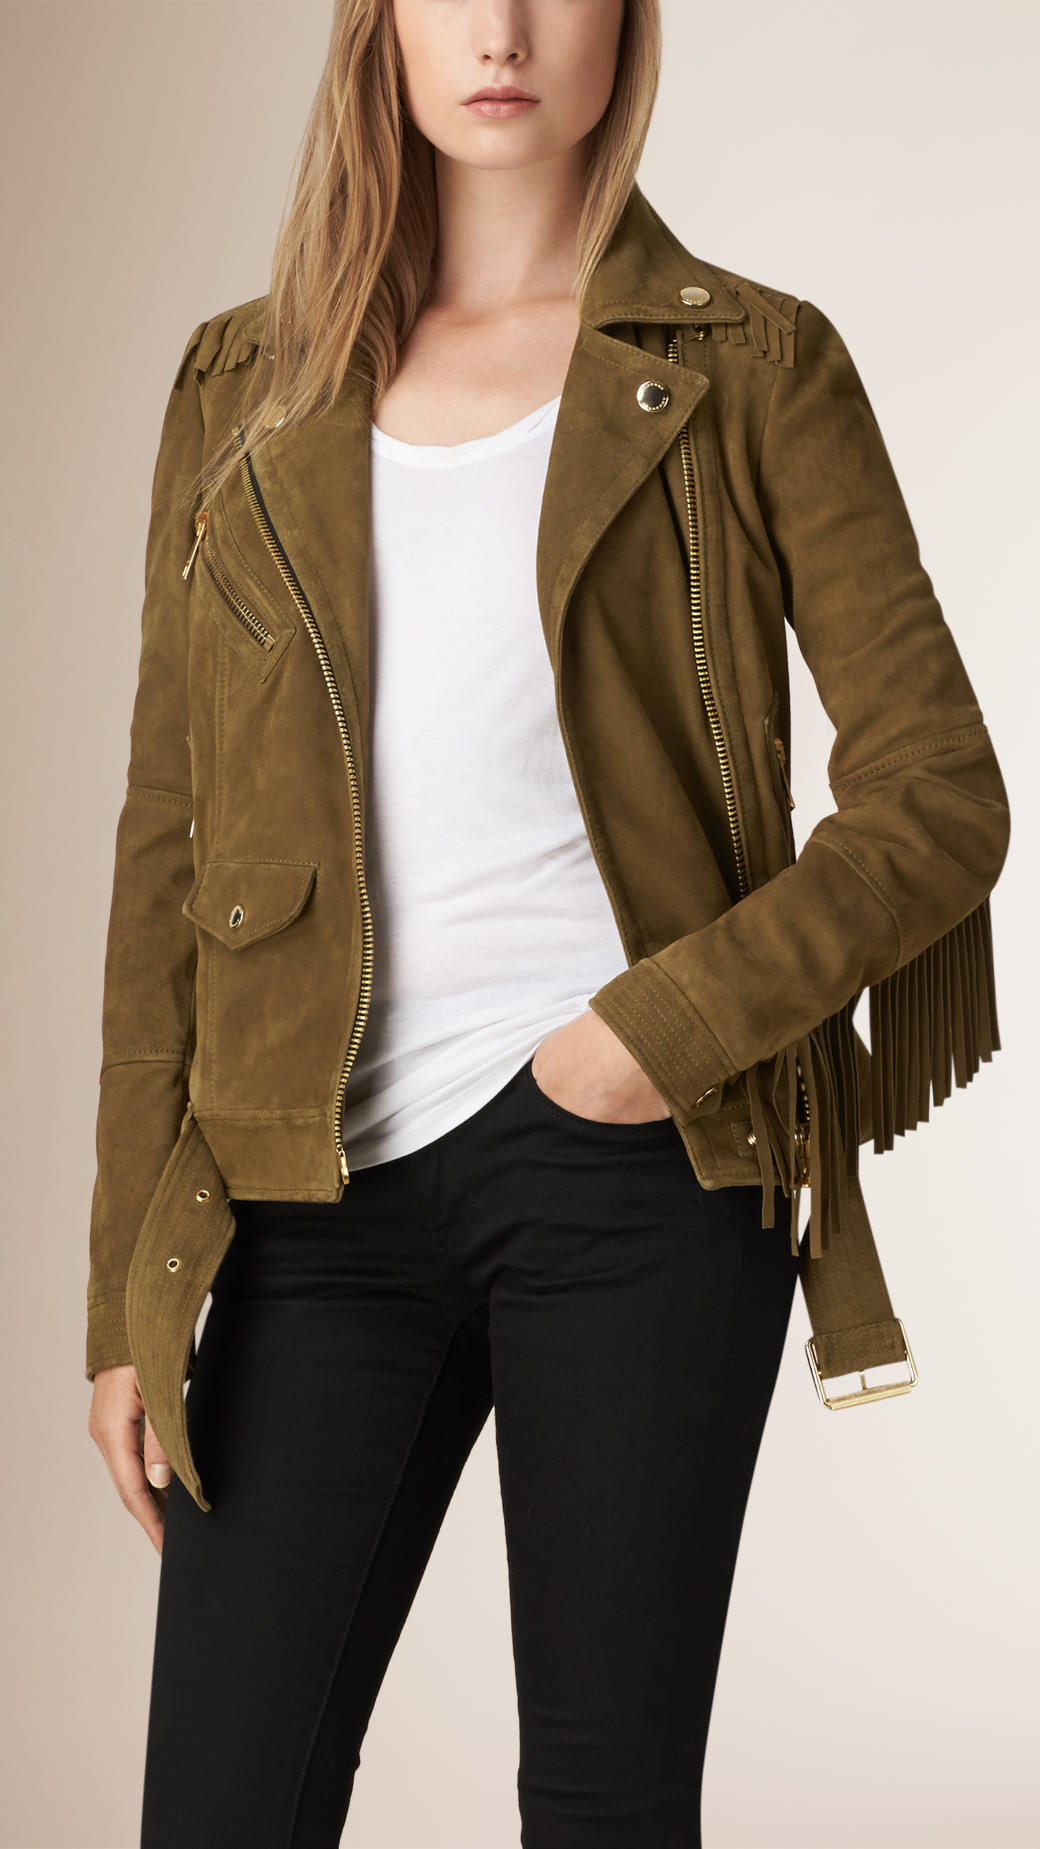 Burberry Fringed Suede Biker Jacket in Khaki (Natural) - Lyst